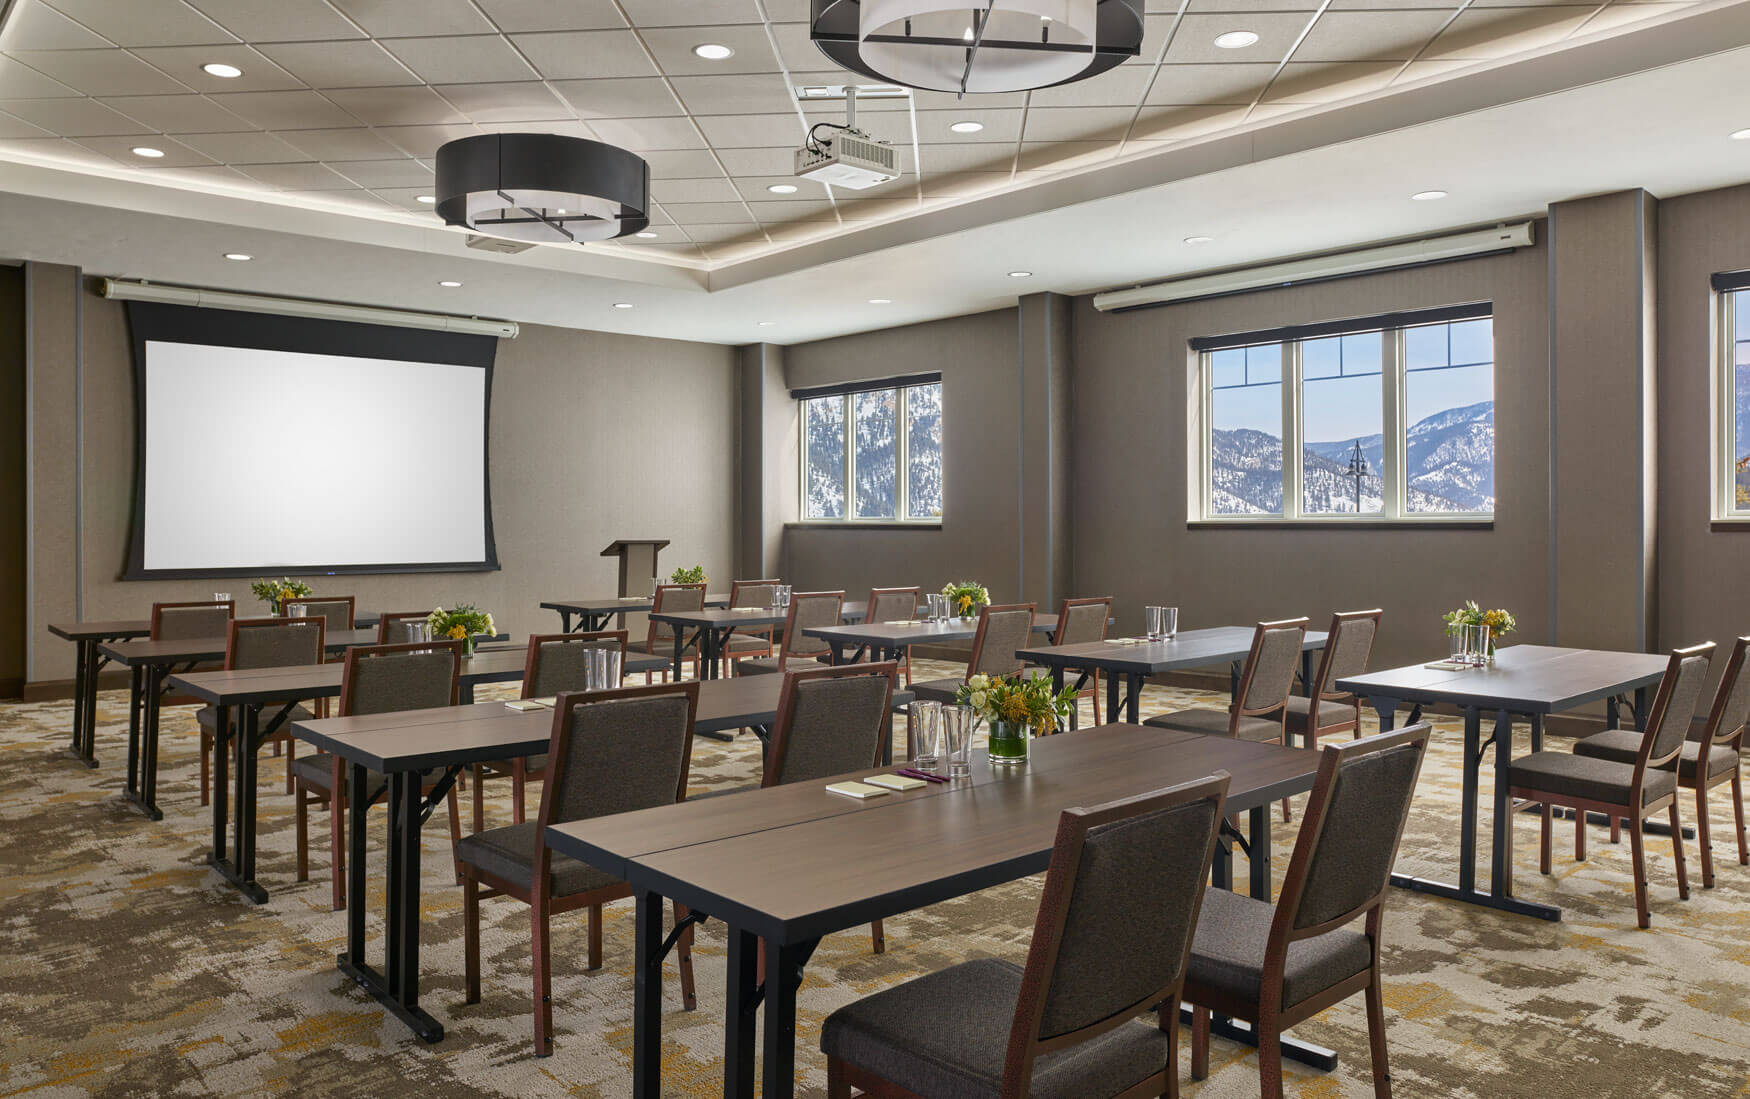 Sapphire Meeting Room set-up classroom style